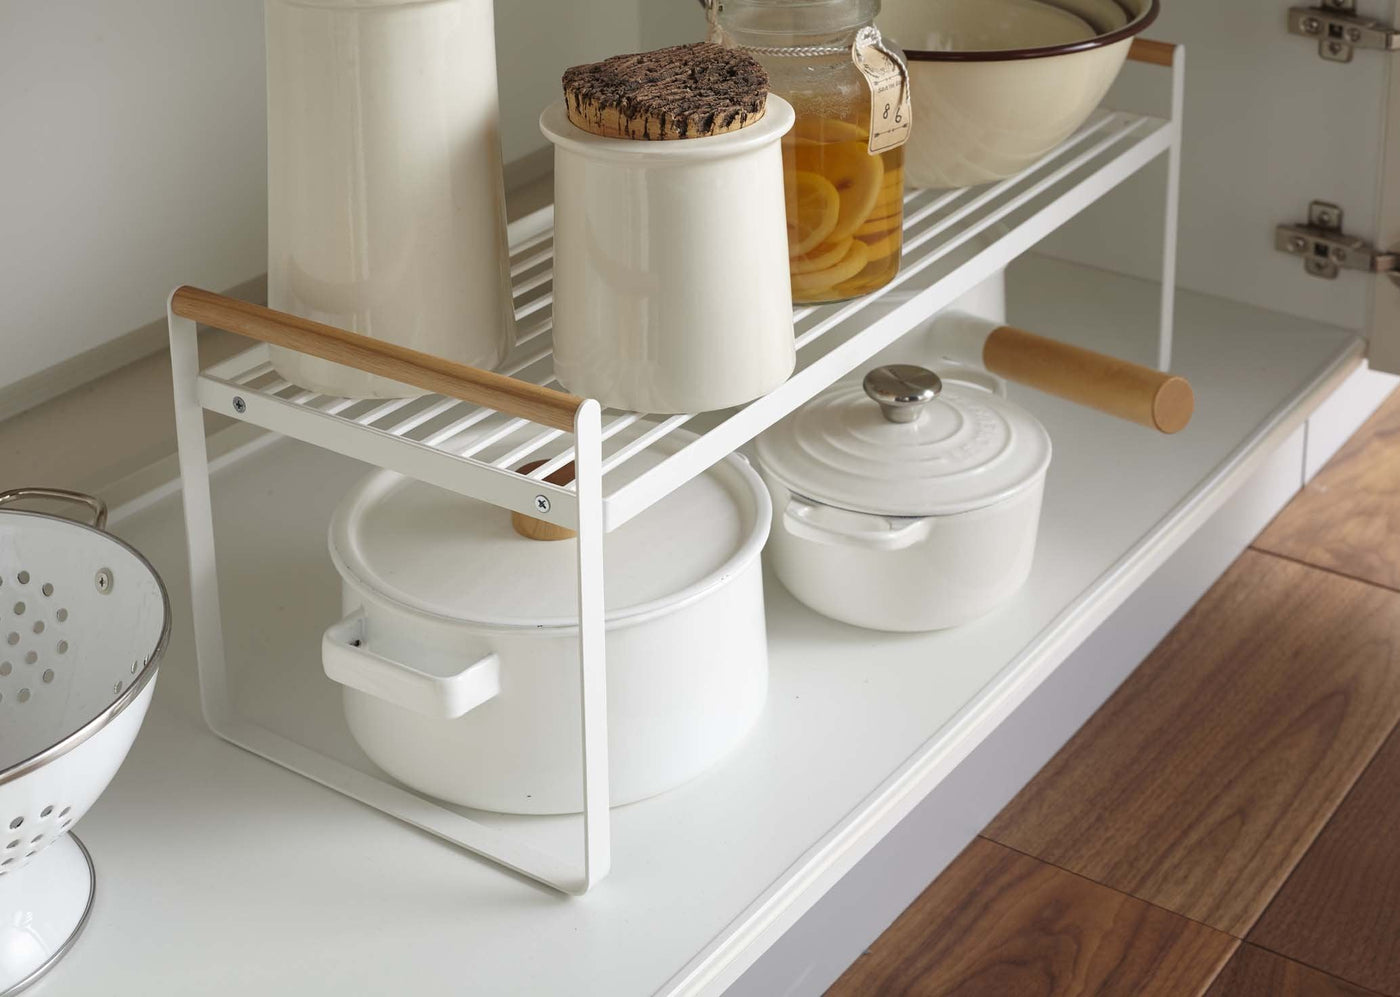 Side angled view of Yamazaki Wired Organizer Rack inside of a kitchen cabinet, stocked with mixing bowls and pots